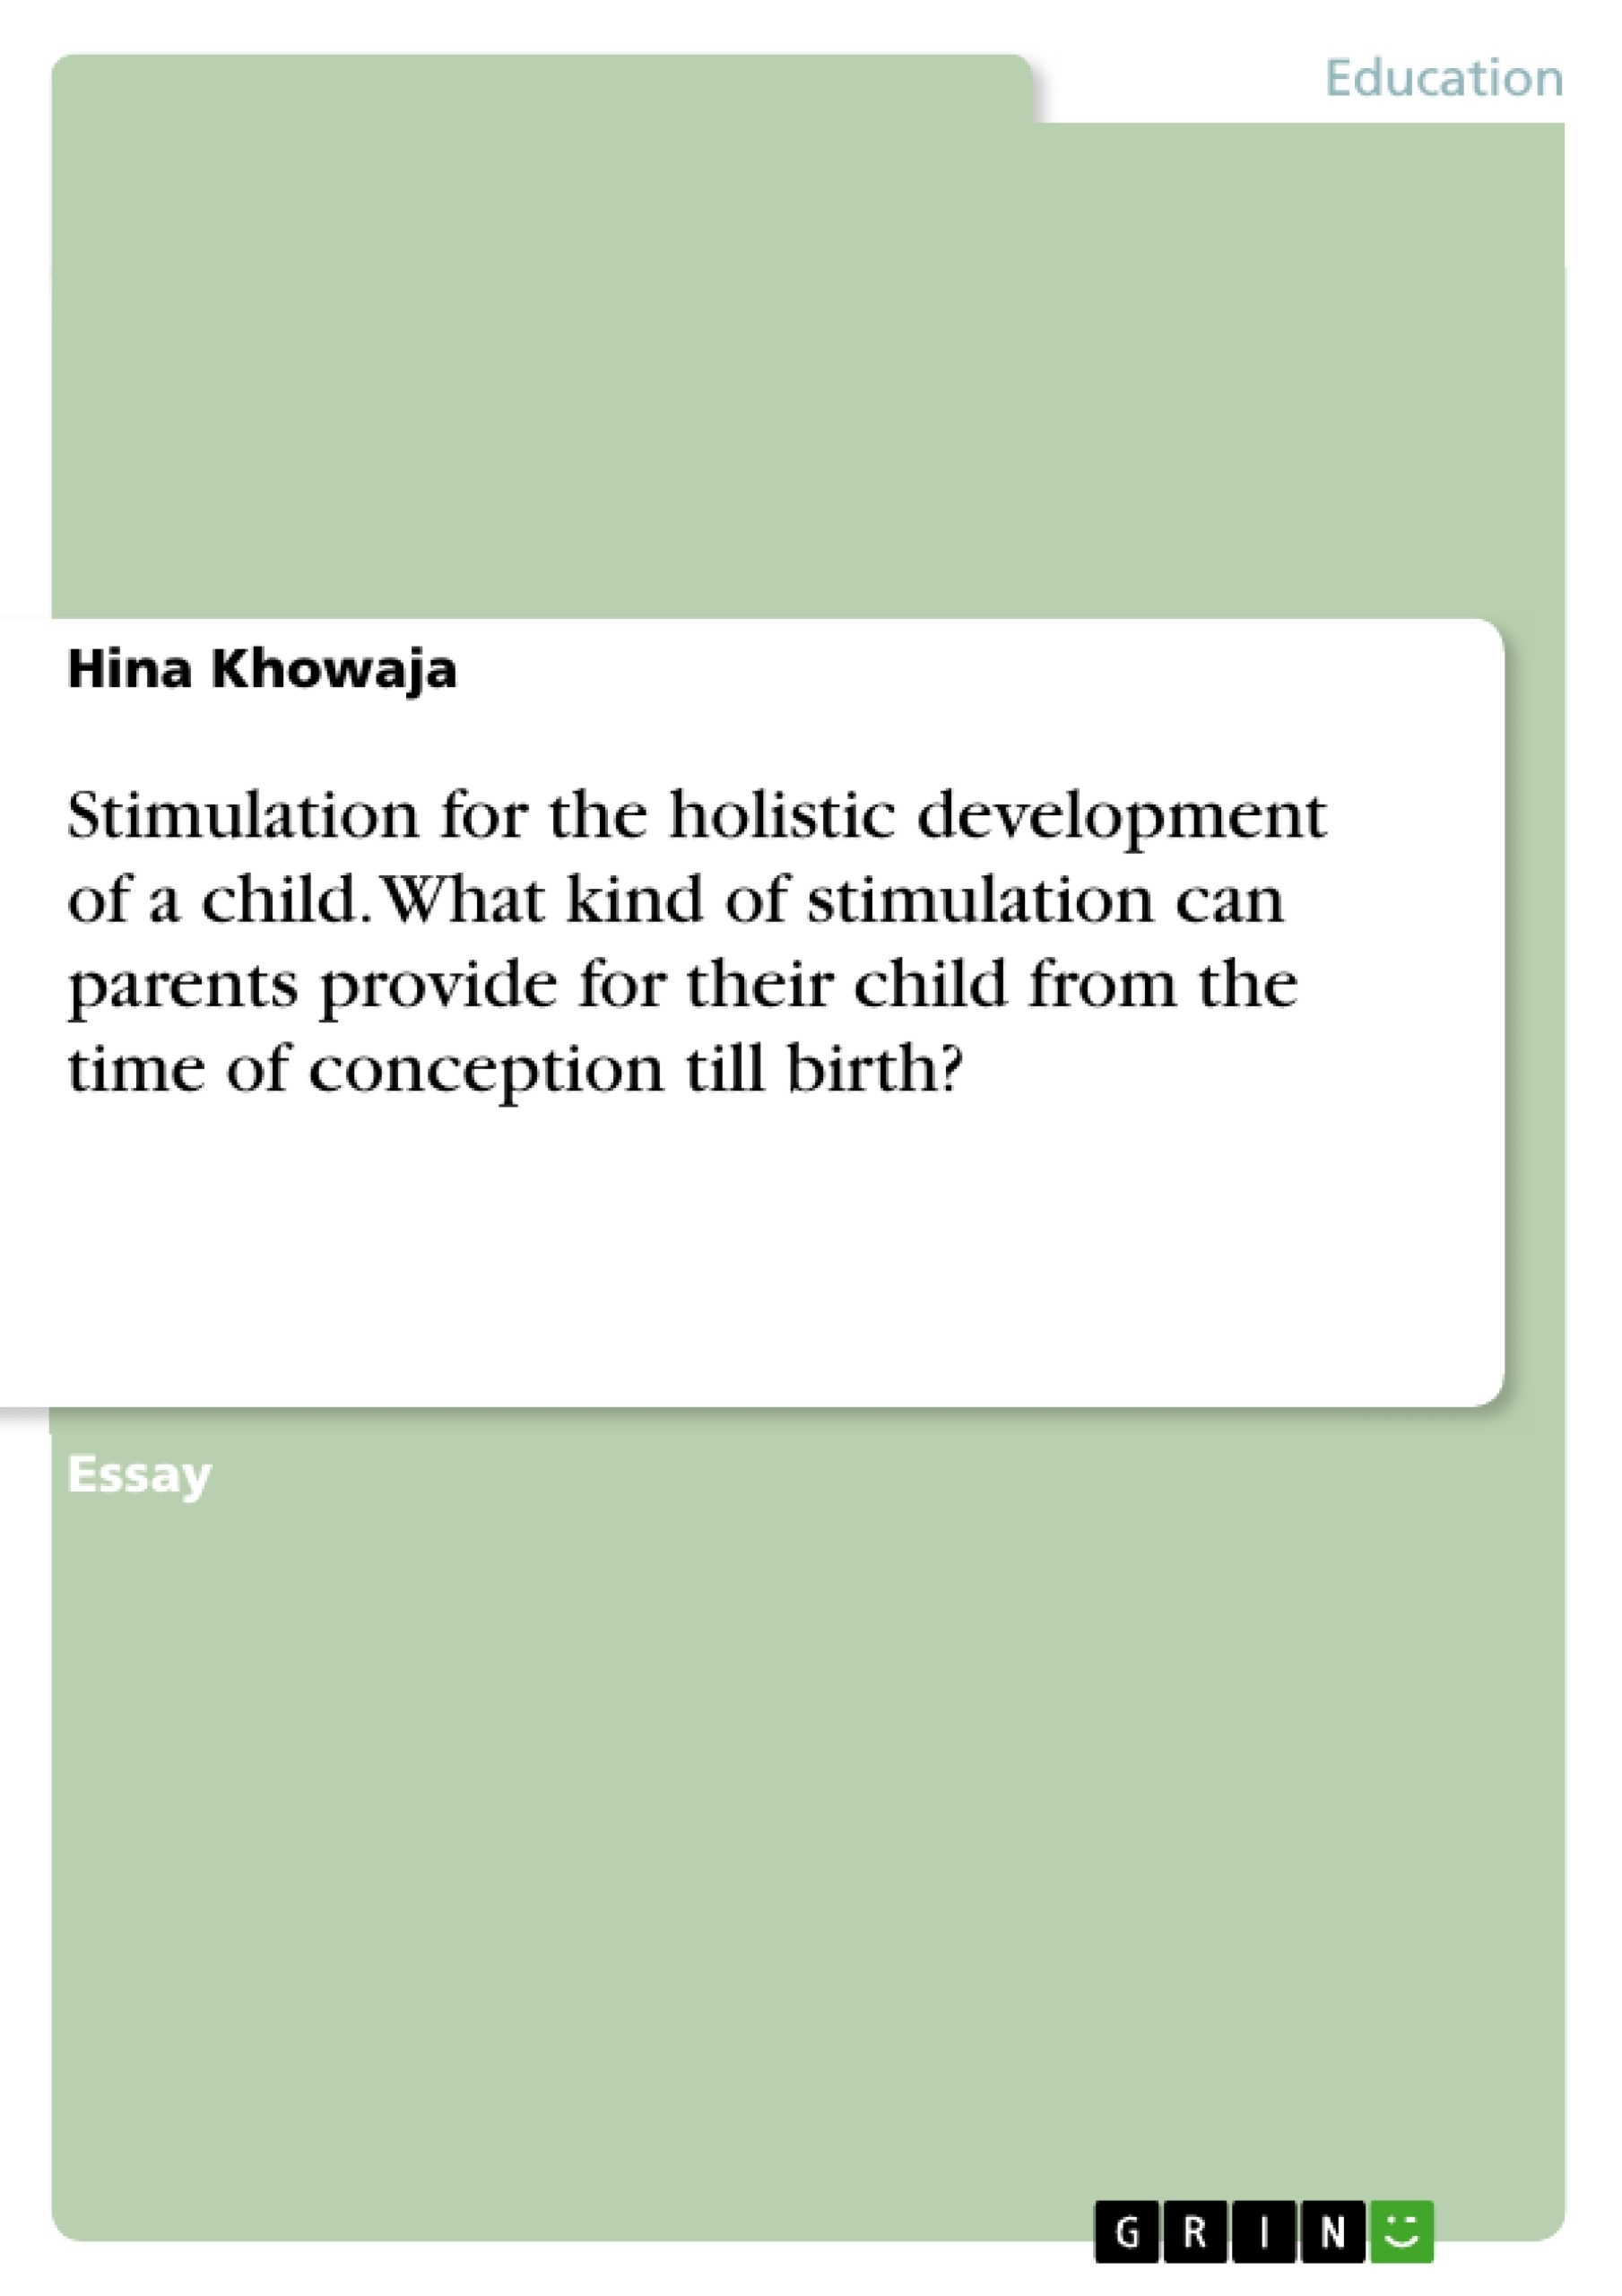 Title: Stimulation for the holistic development of a child. What kind of stimulation can parents provide for their child from the time of conception till birth?